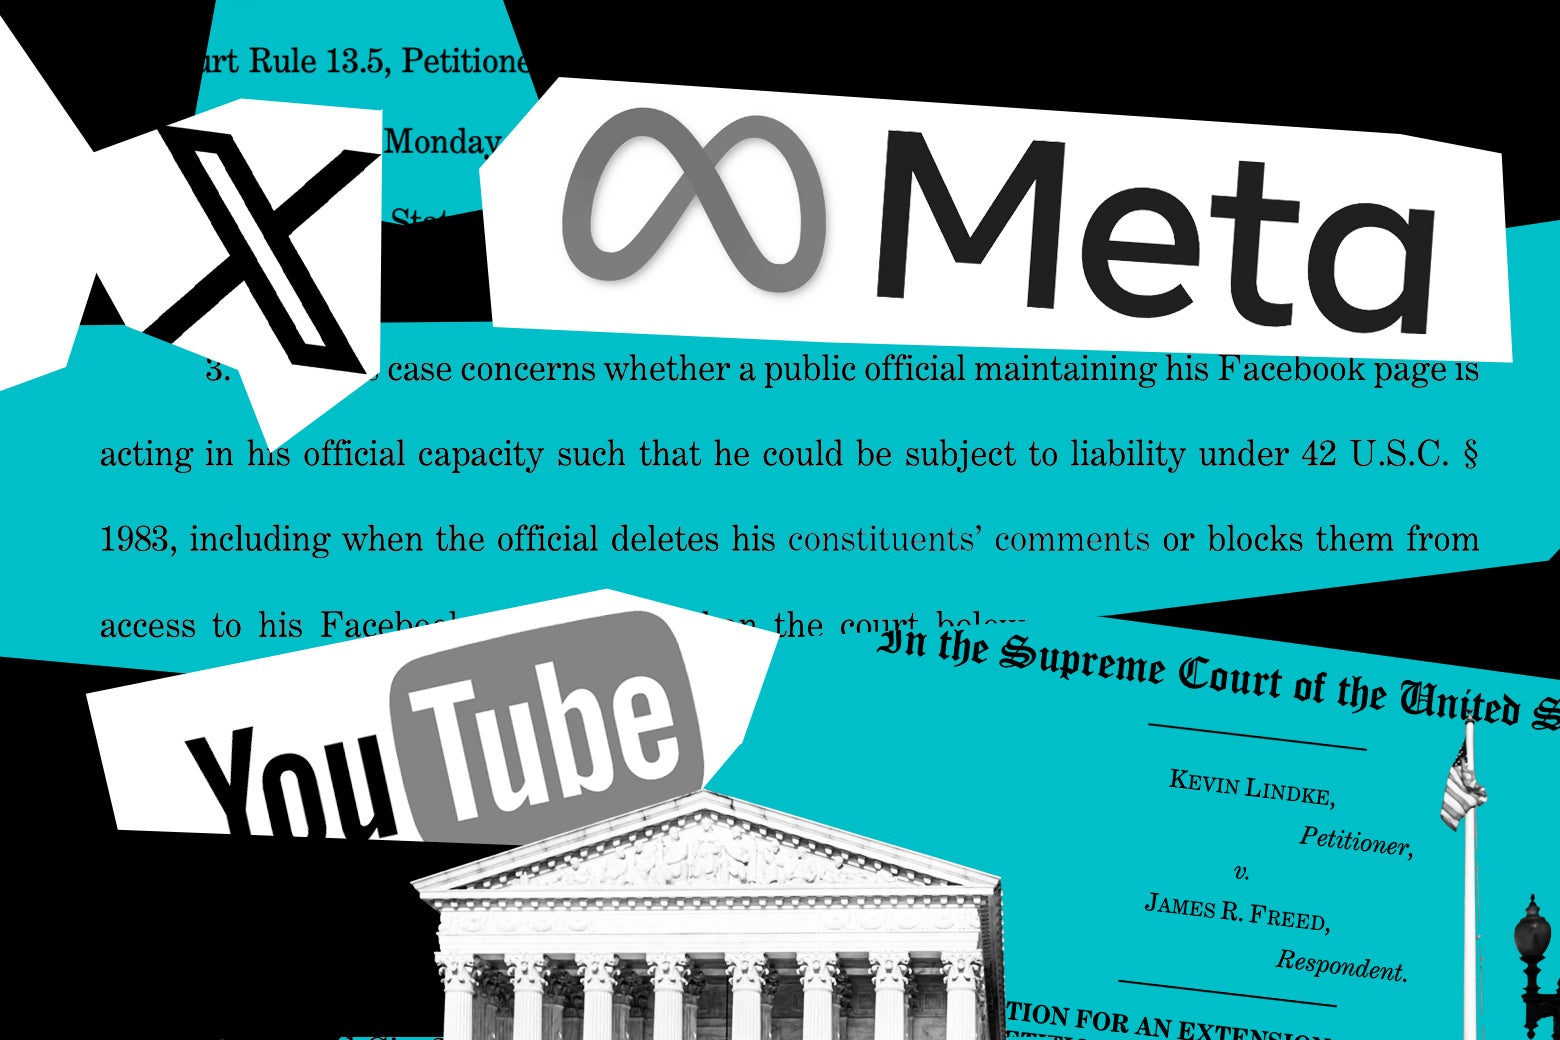 The Supreme Court reconsiders the internet. Uh-oh.